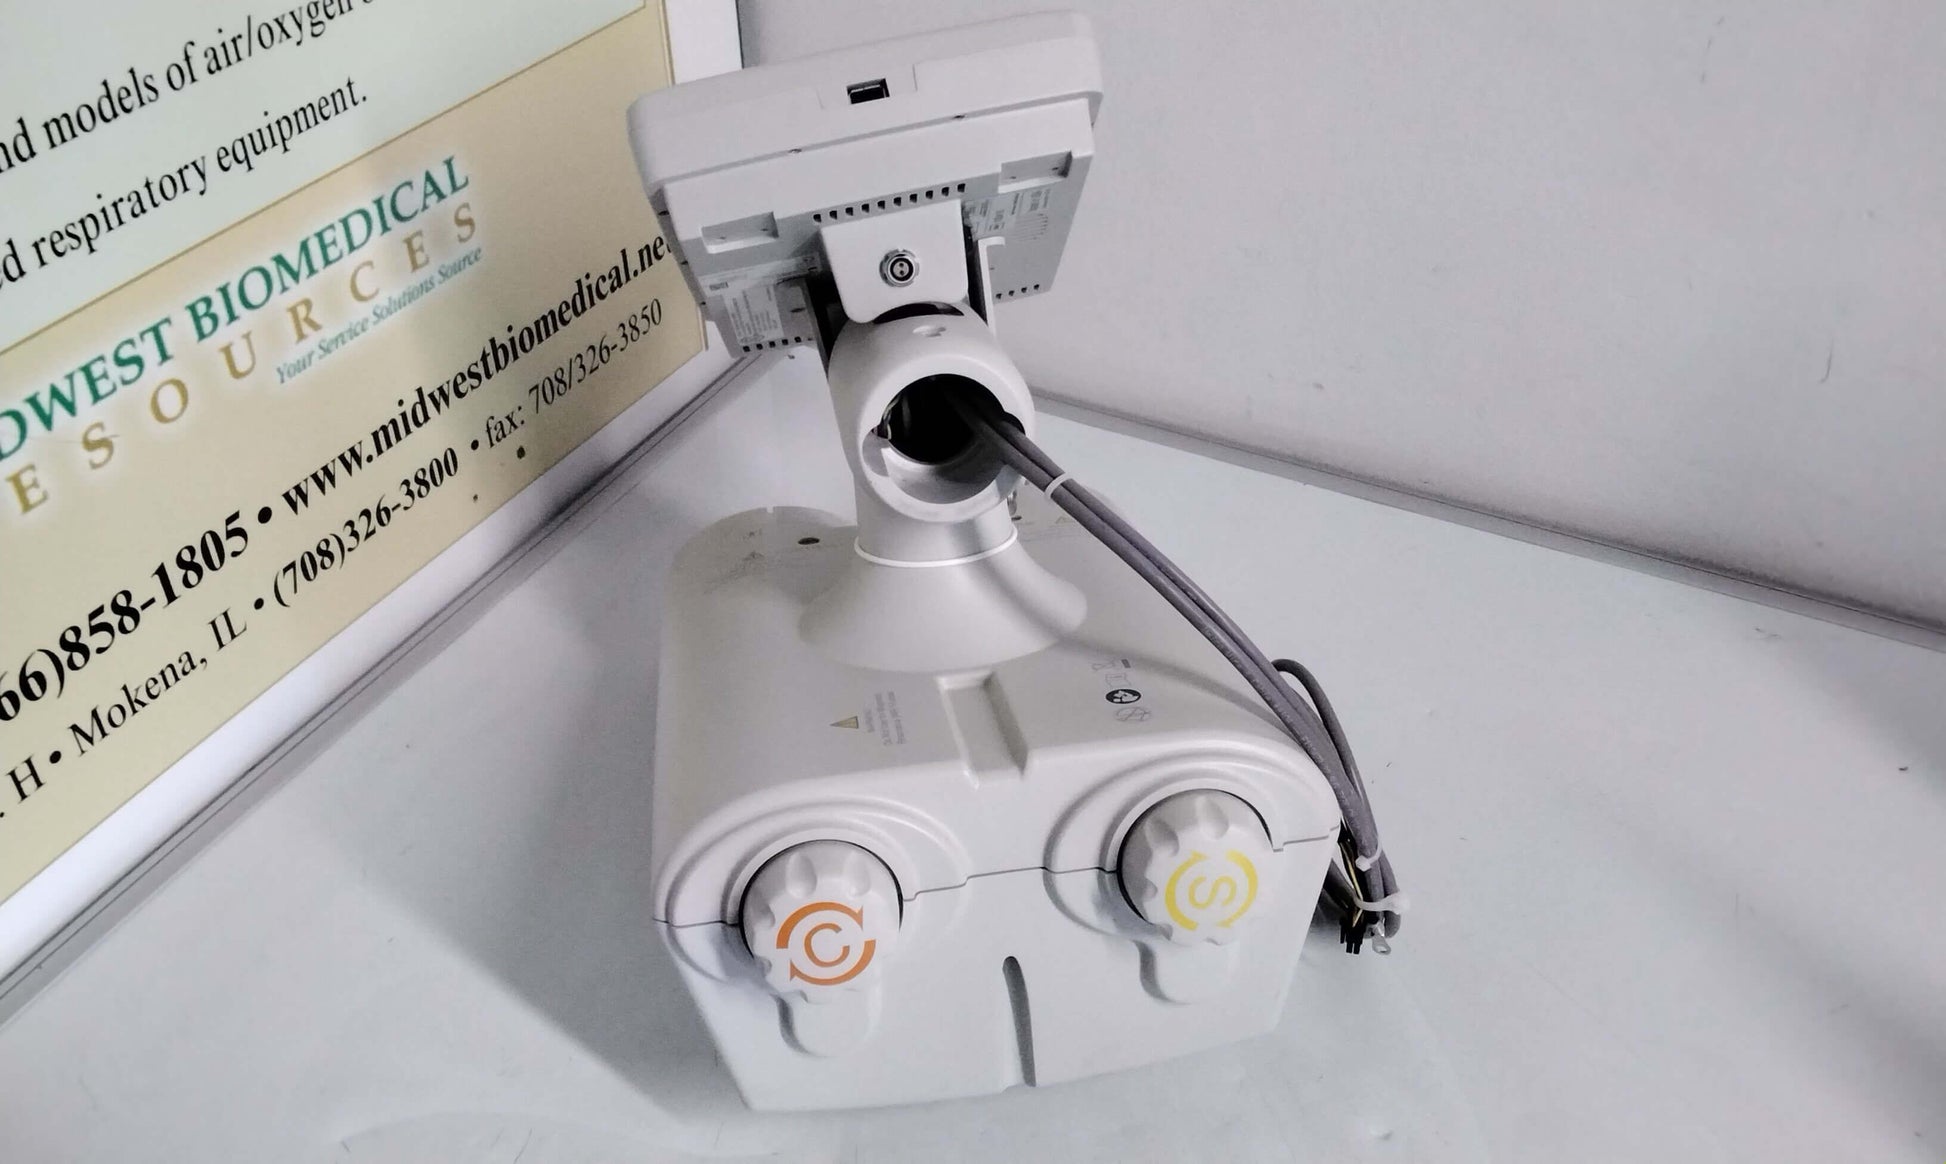 USED Bracco Injeneering Empower CTA Dual Injector 102410 with Free Shipping and Warranty - MBR Medicals